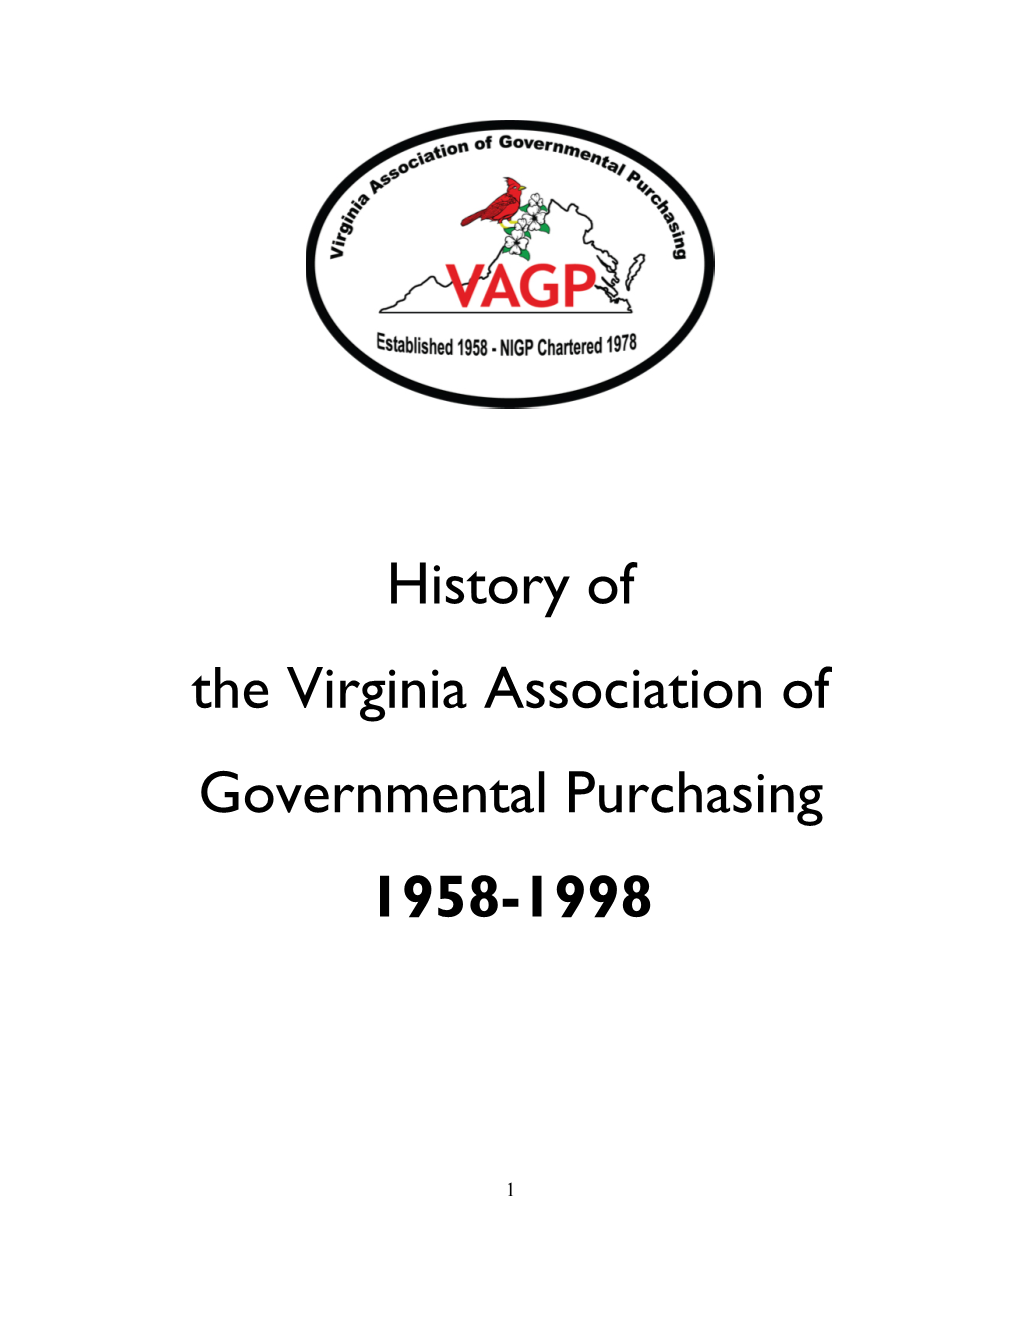 History of the Virginia Association of Governmental Purchasing 1958-1998